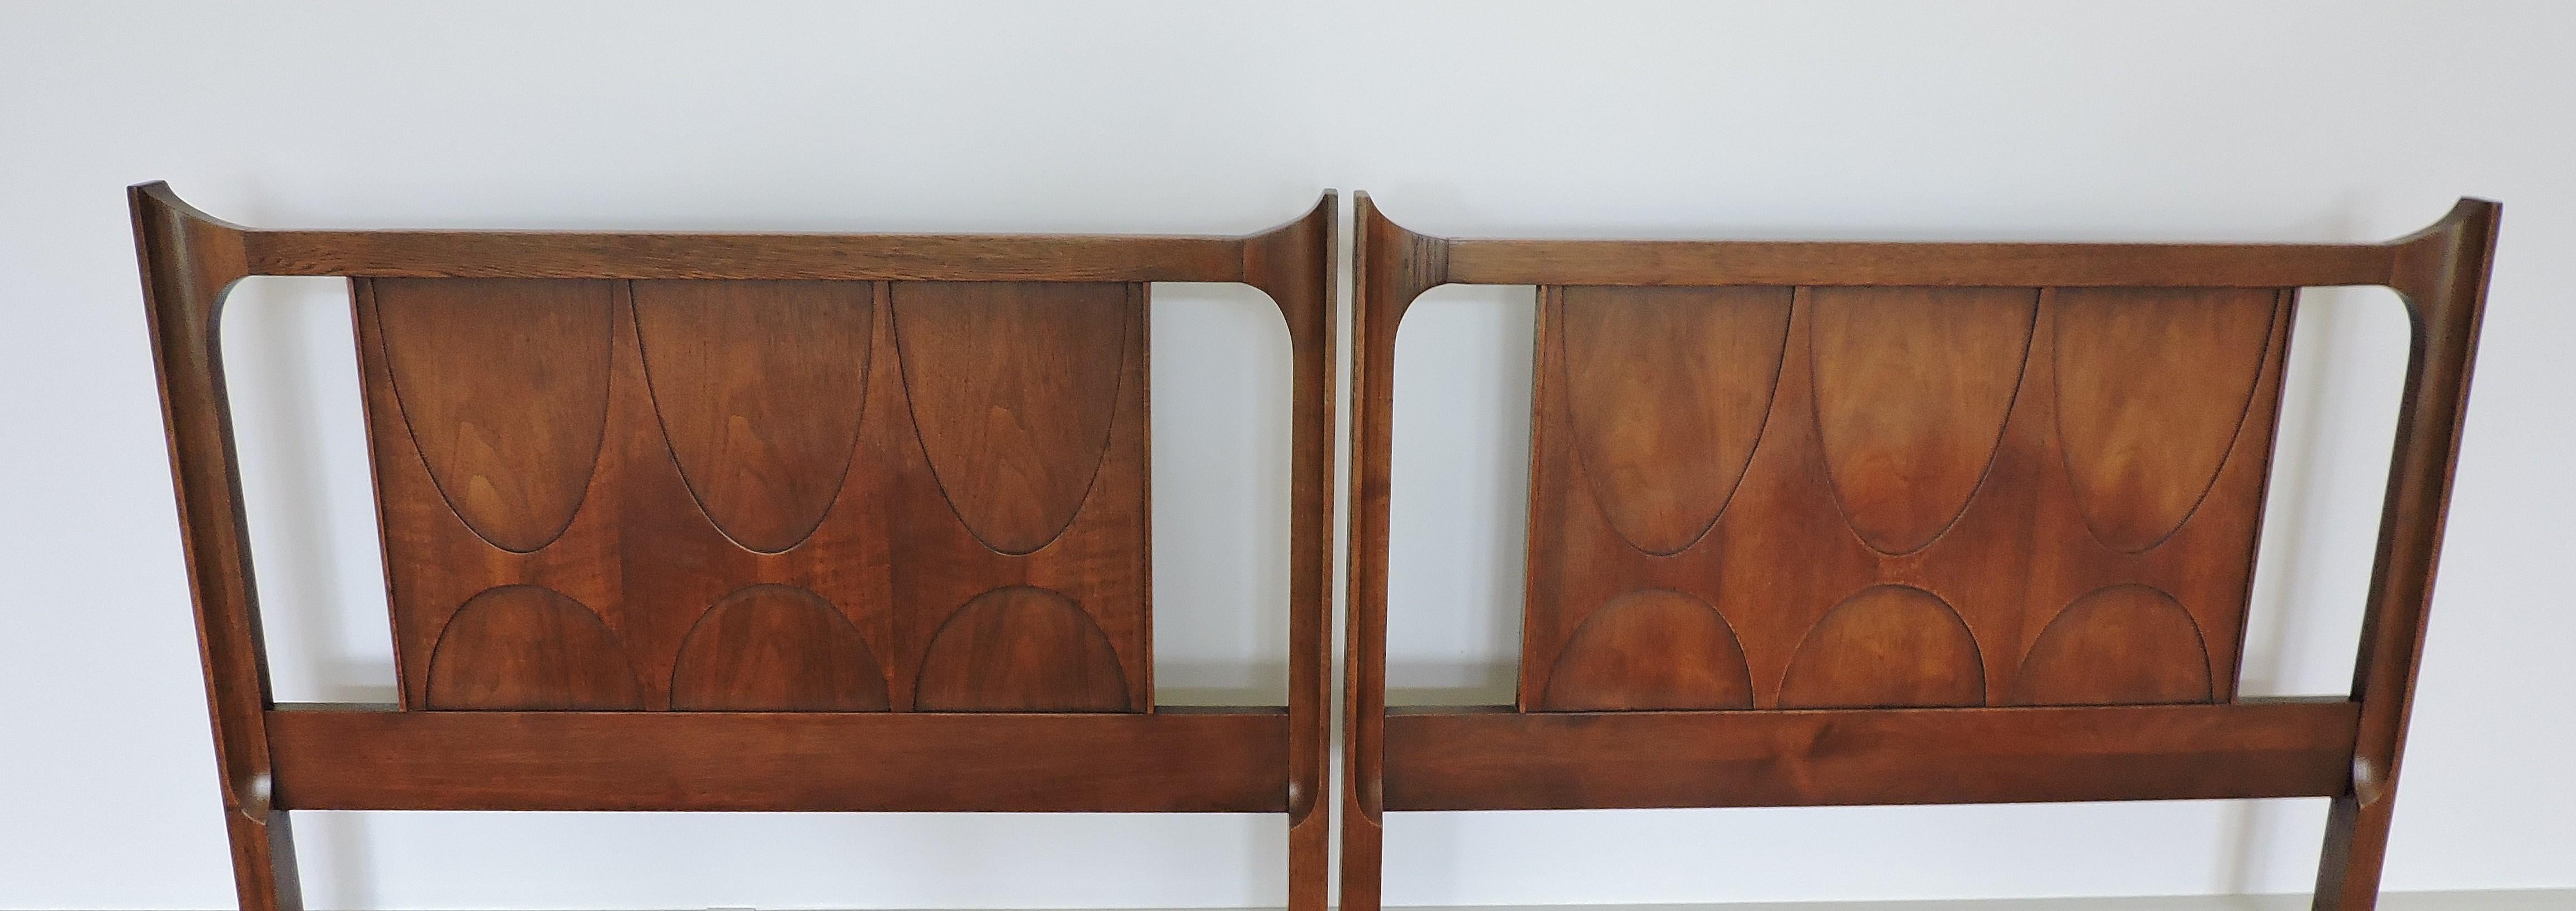 Distinctive pair of walnut twin beds which were part of Broyhill's Brasilia line that was inspired by Oscar Niemeyers Mid-Century Modern Brazilian architecture. These beds have headboards with arched details. Unmarked, but were part of a set that